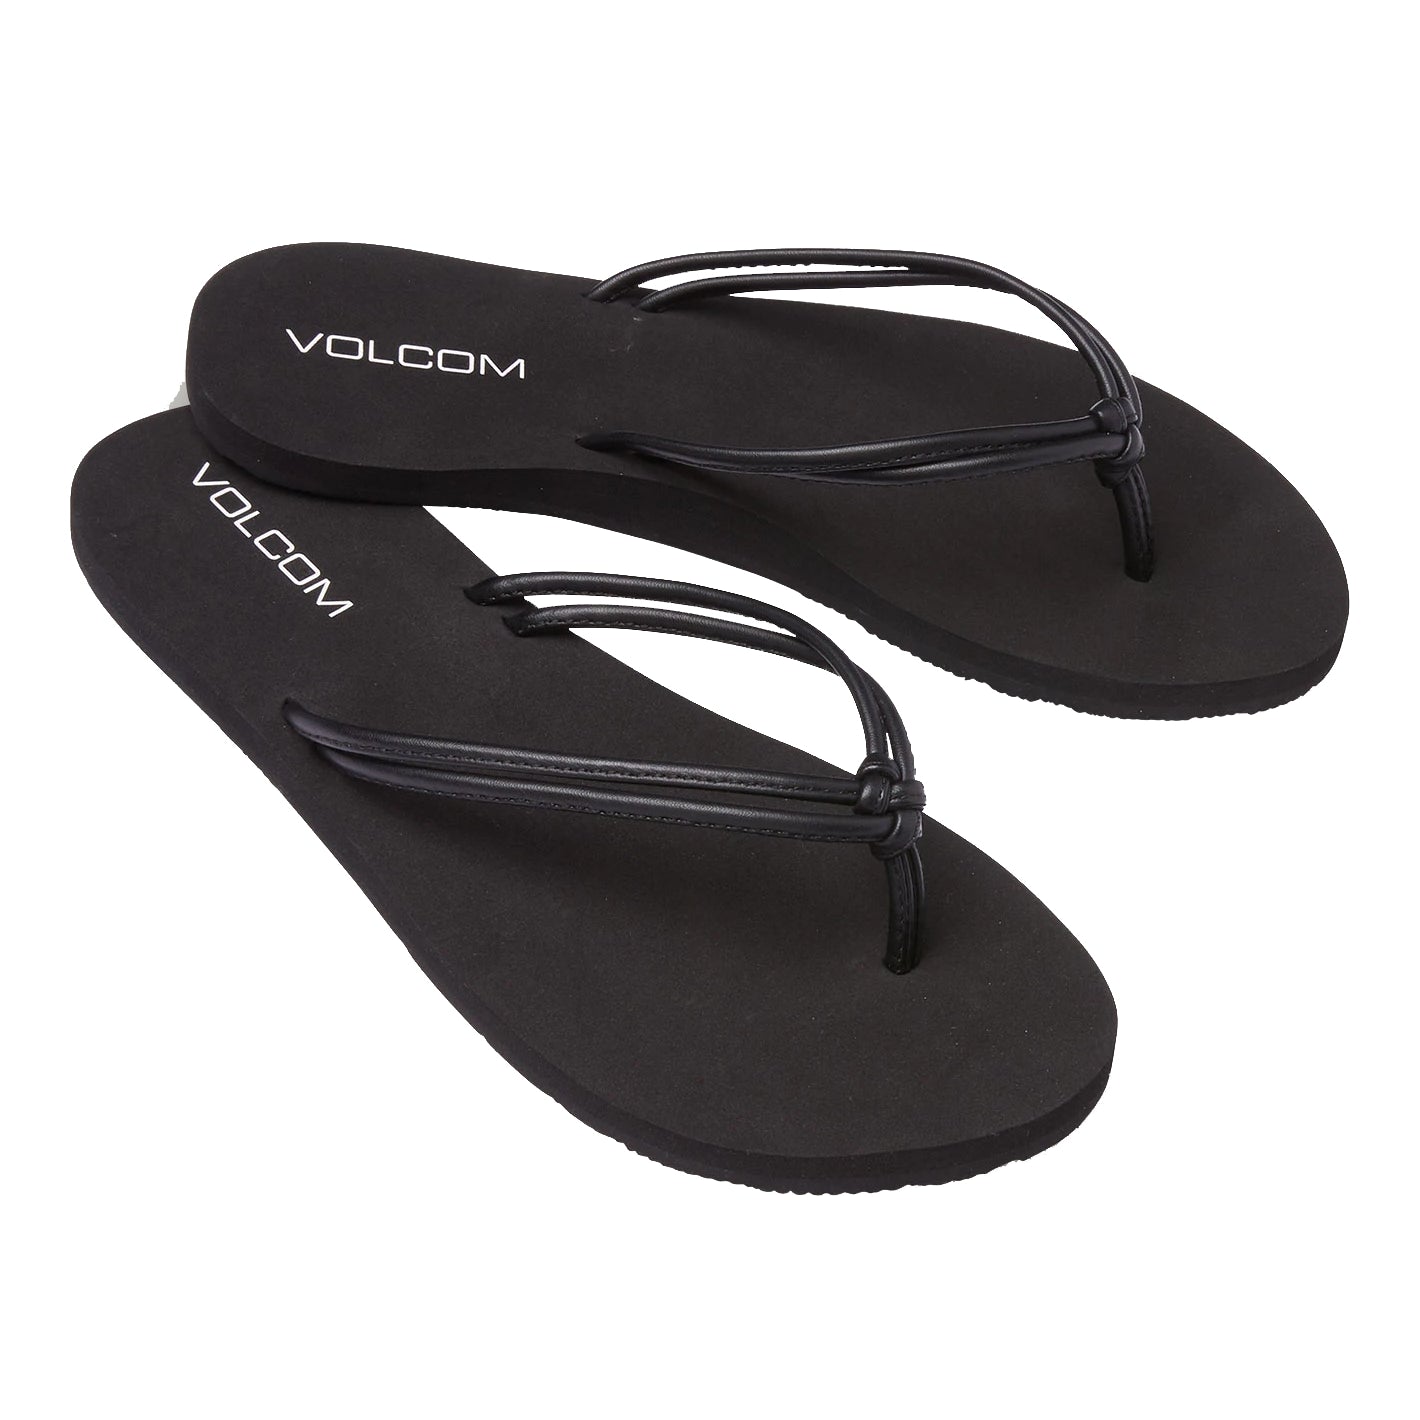 Volcom Forever and Ever 2 Womens Sandal BKO-Black Out 5